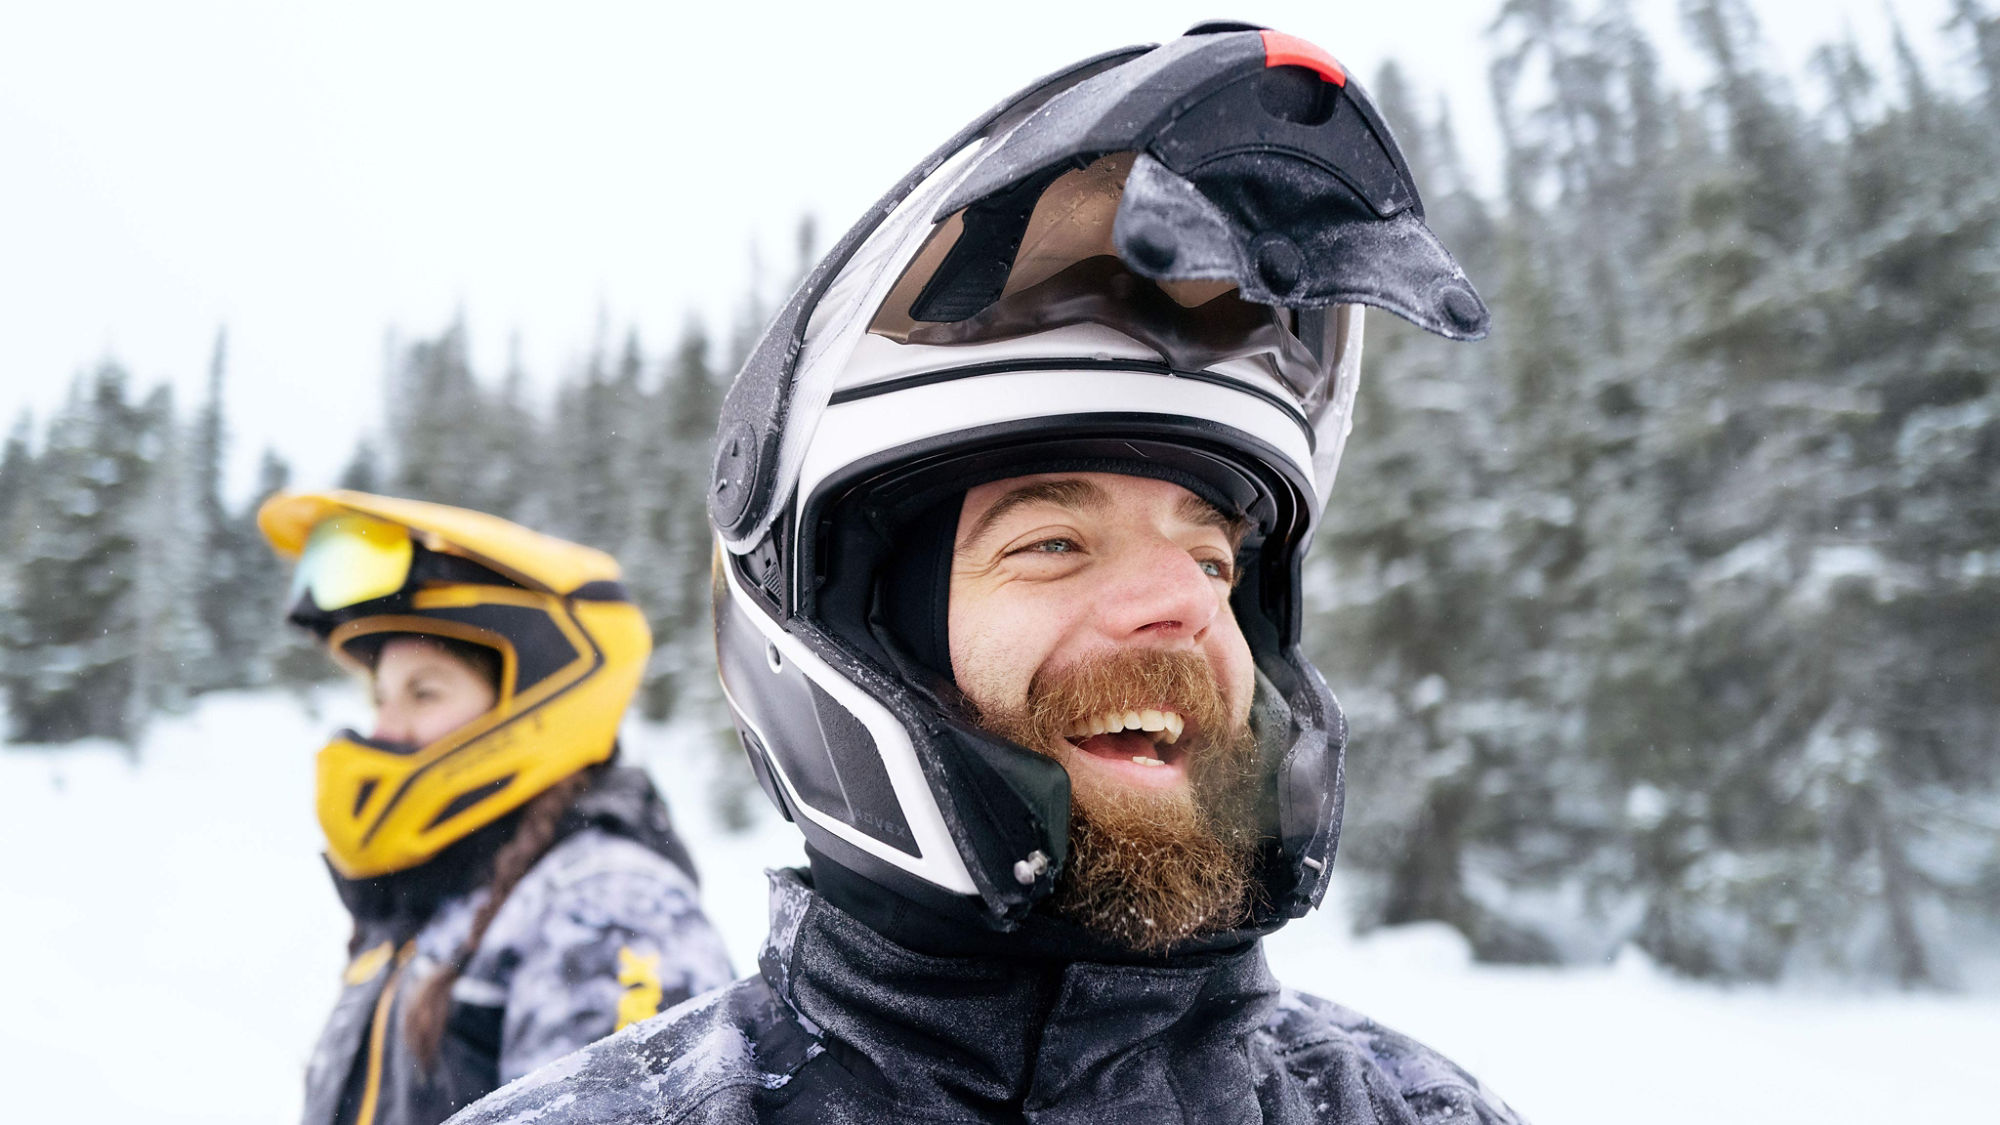 Two riders wearing Ski-Doo trail helmets and apparels